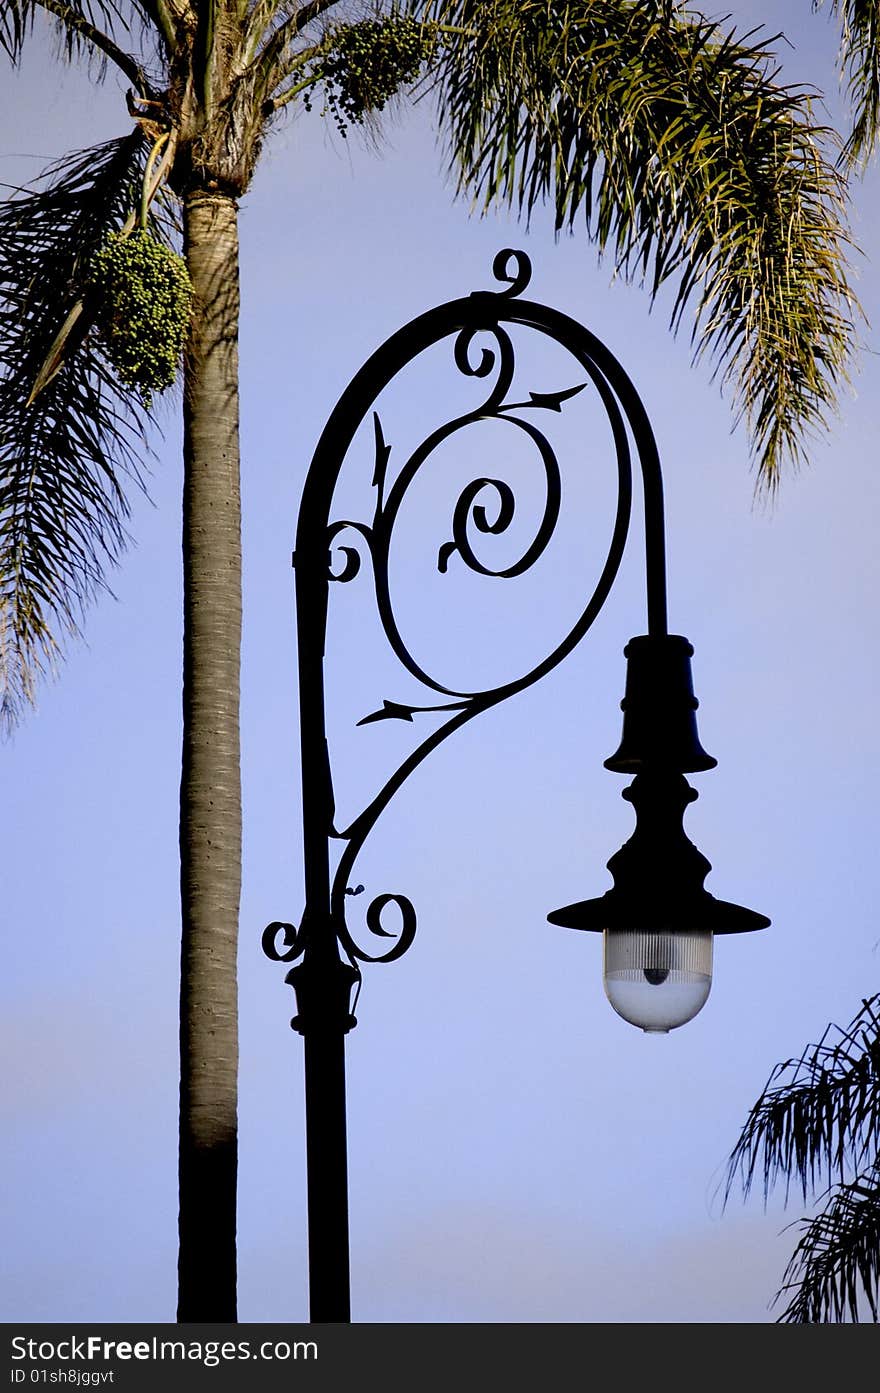 Ornate wrought iron street light in the early evening